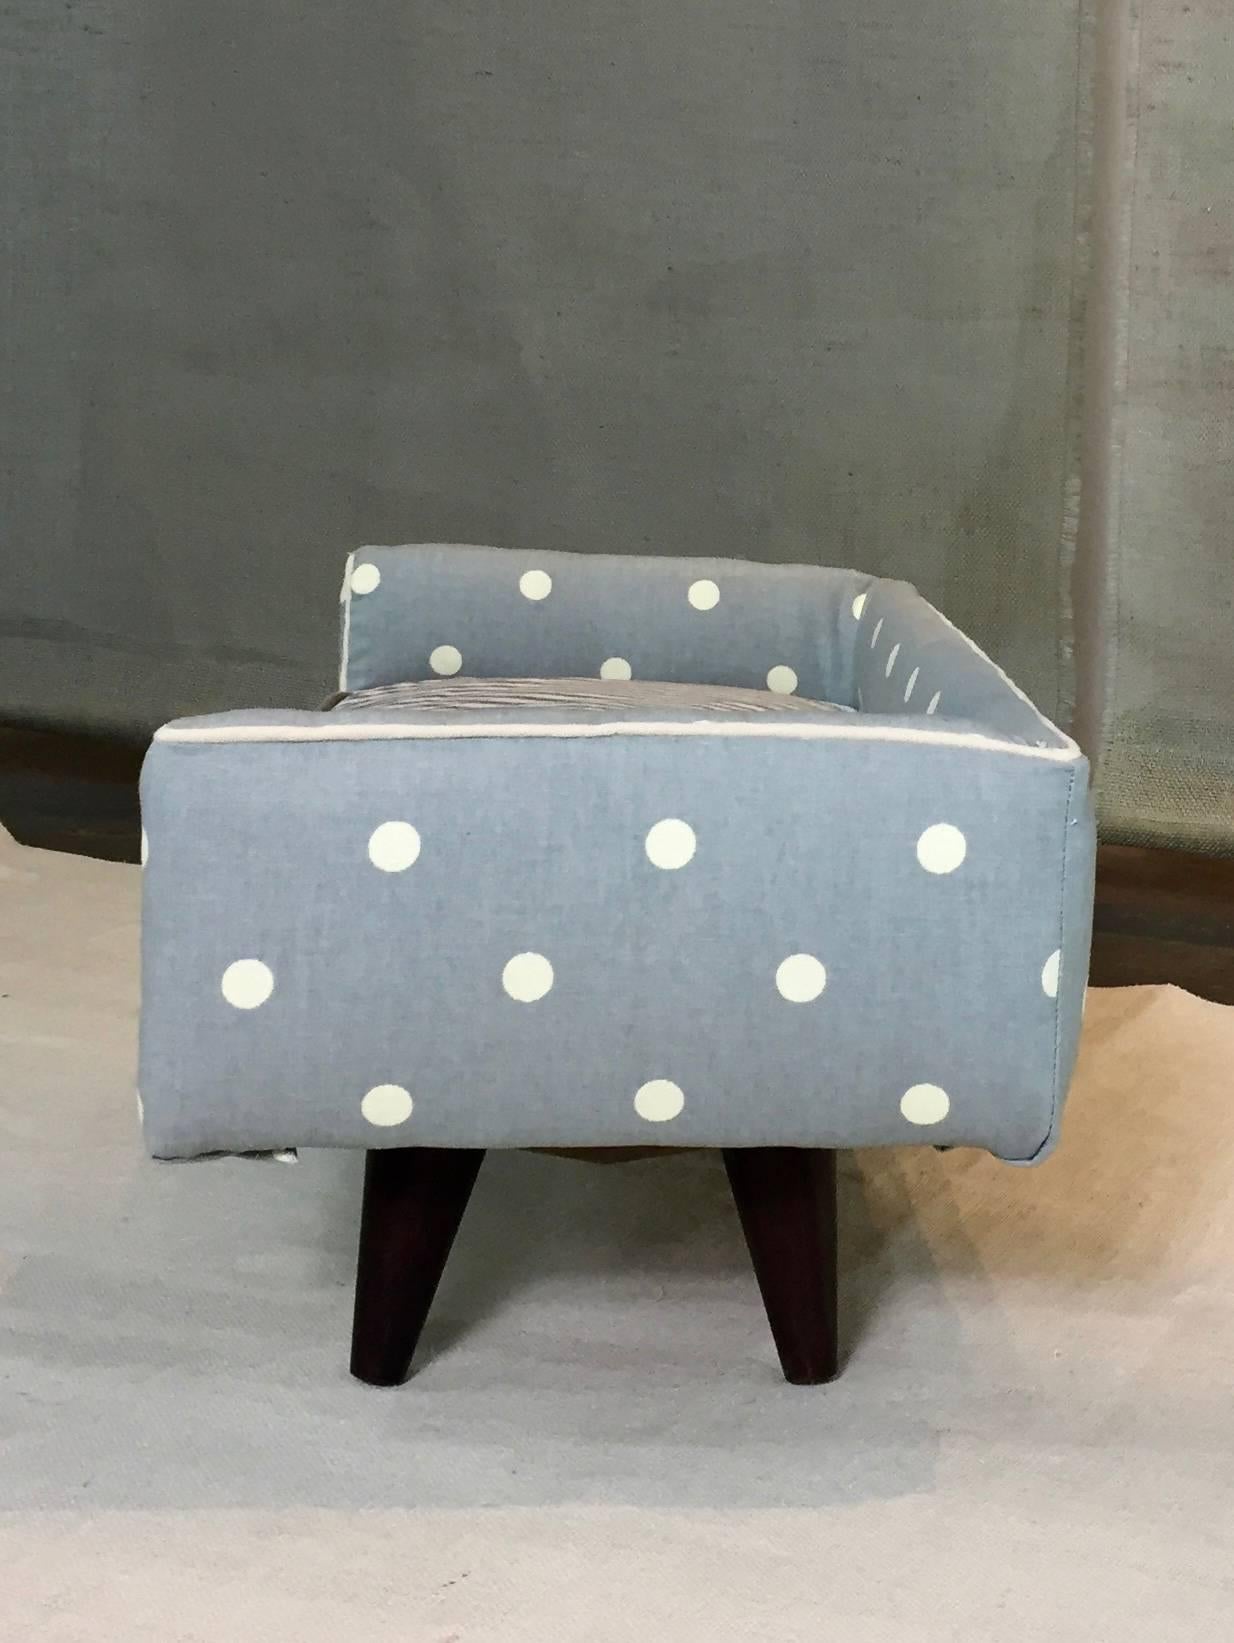 Midcentury Dogbed in Sky-Blue Polka Dot  In Excellent Condition For Sale In Brooklyn, NY